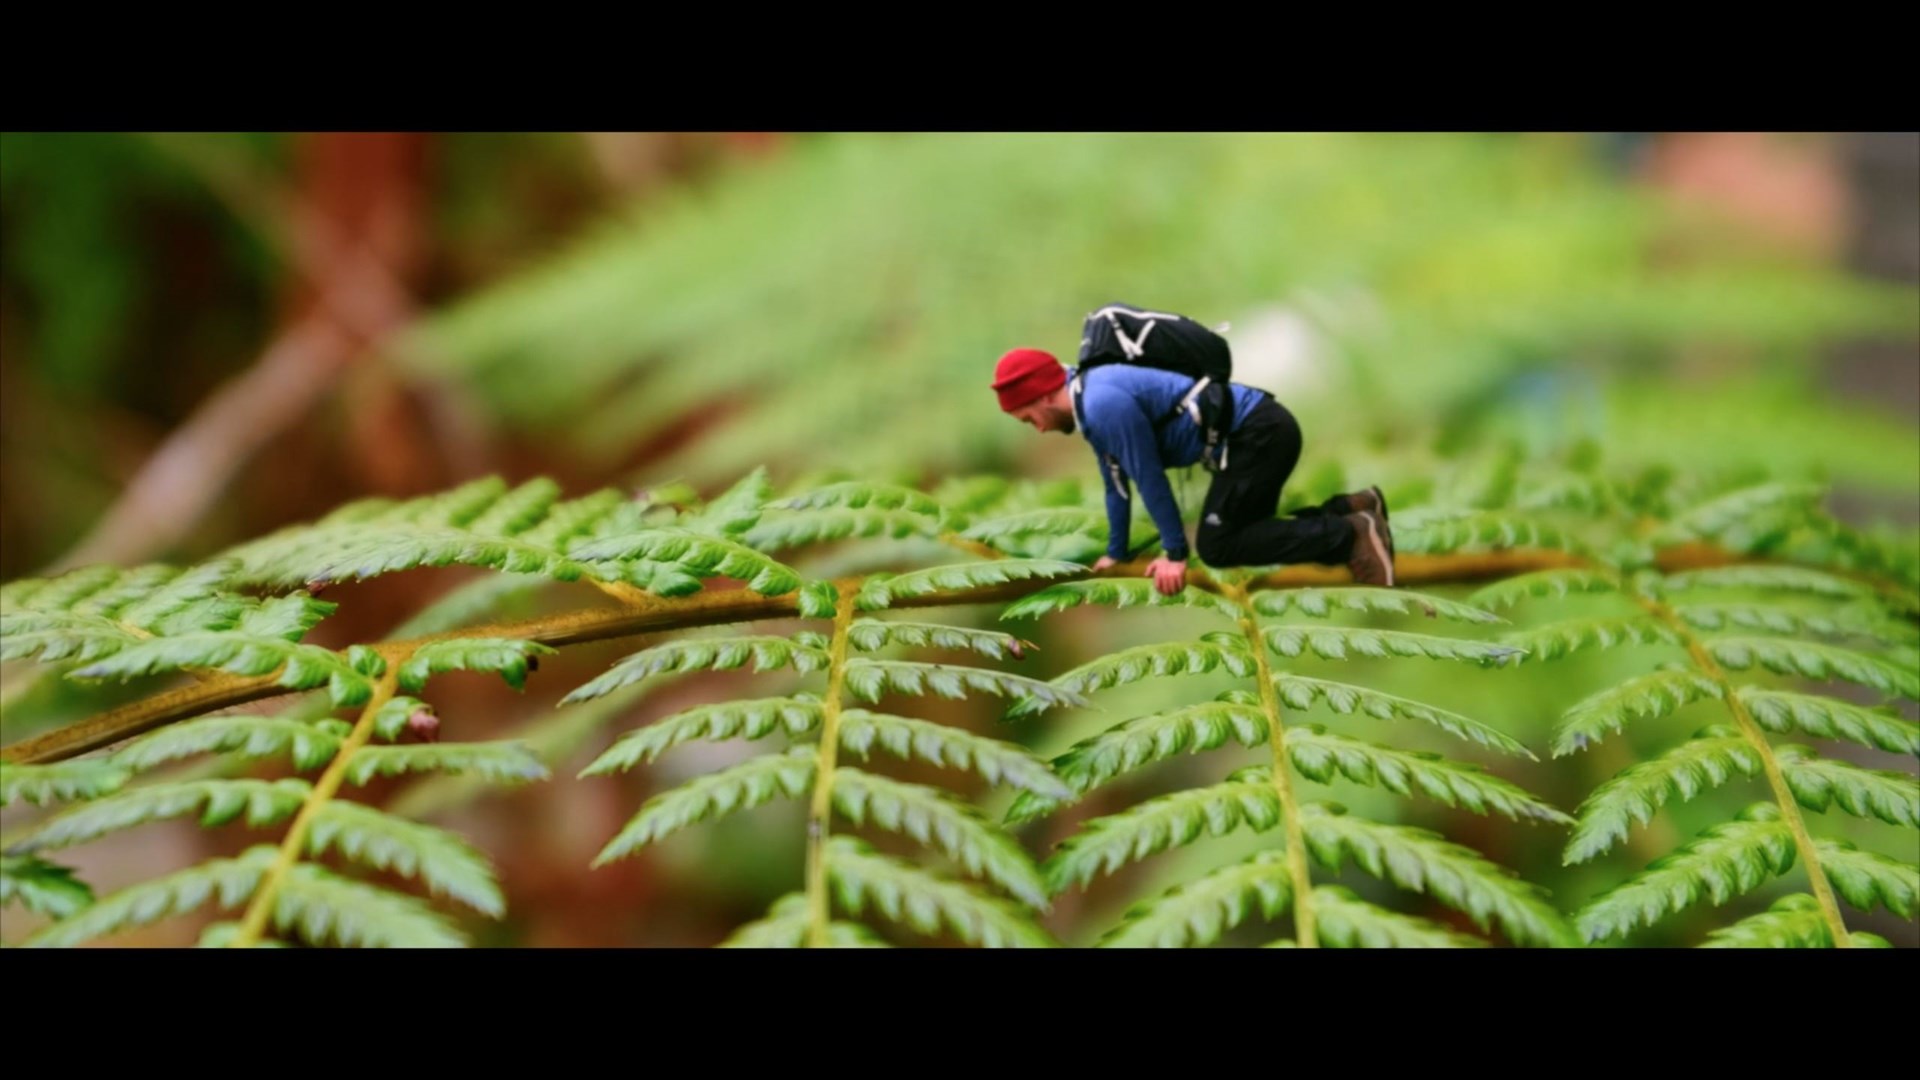 Calum Maclean on a fern as part of his micro adventure.